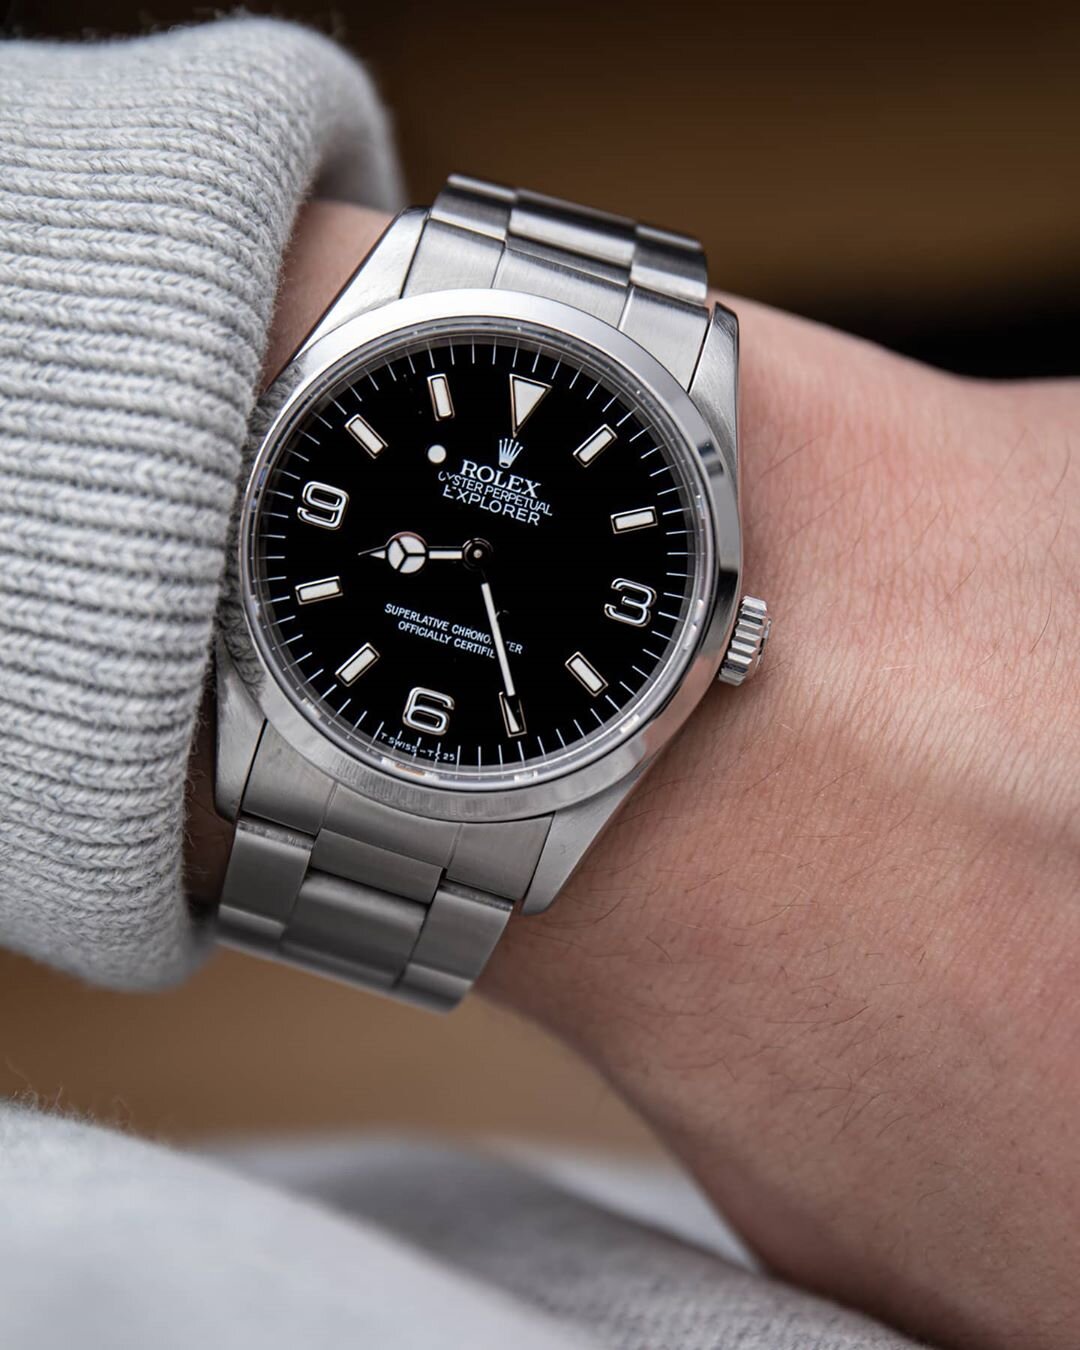 Rolex Explorer reference 14270: A neo 